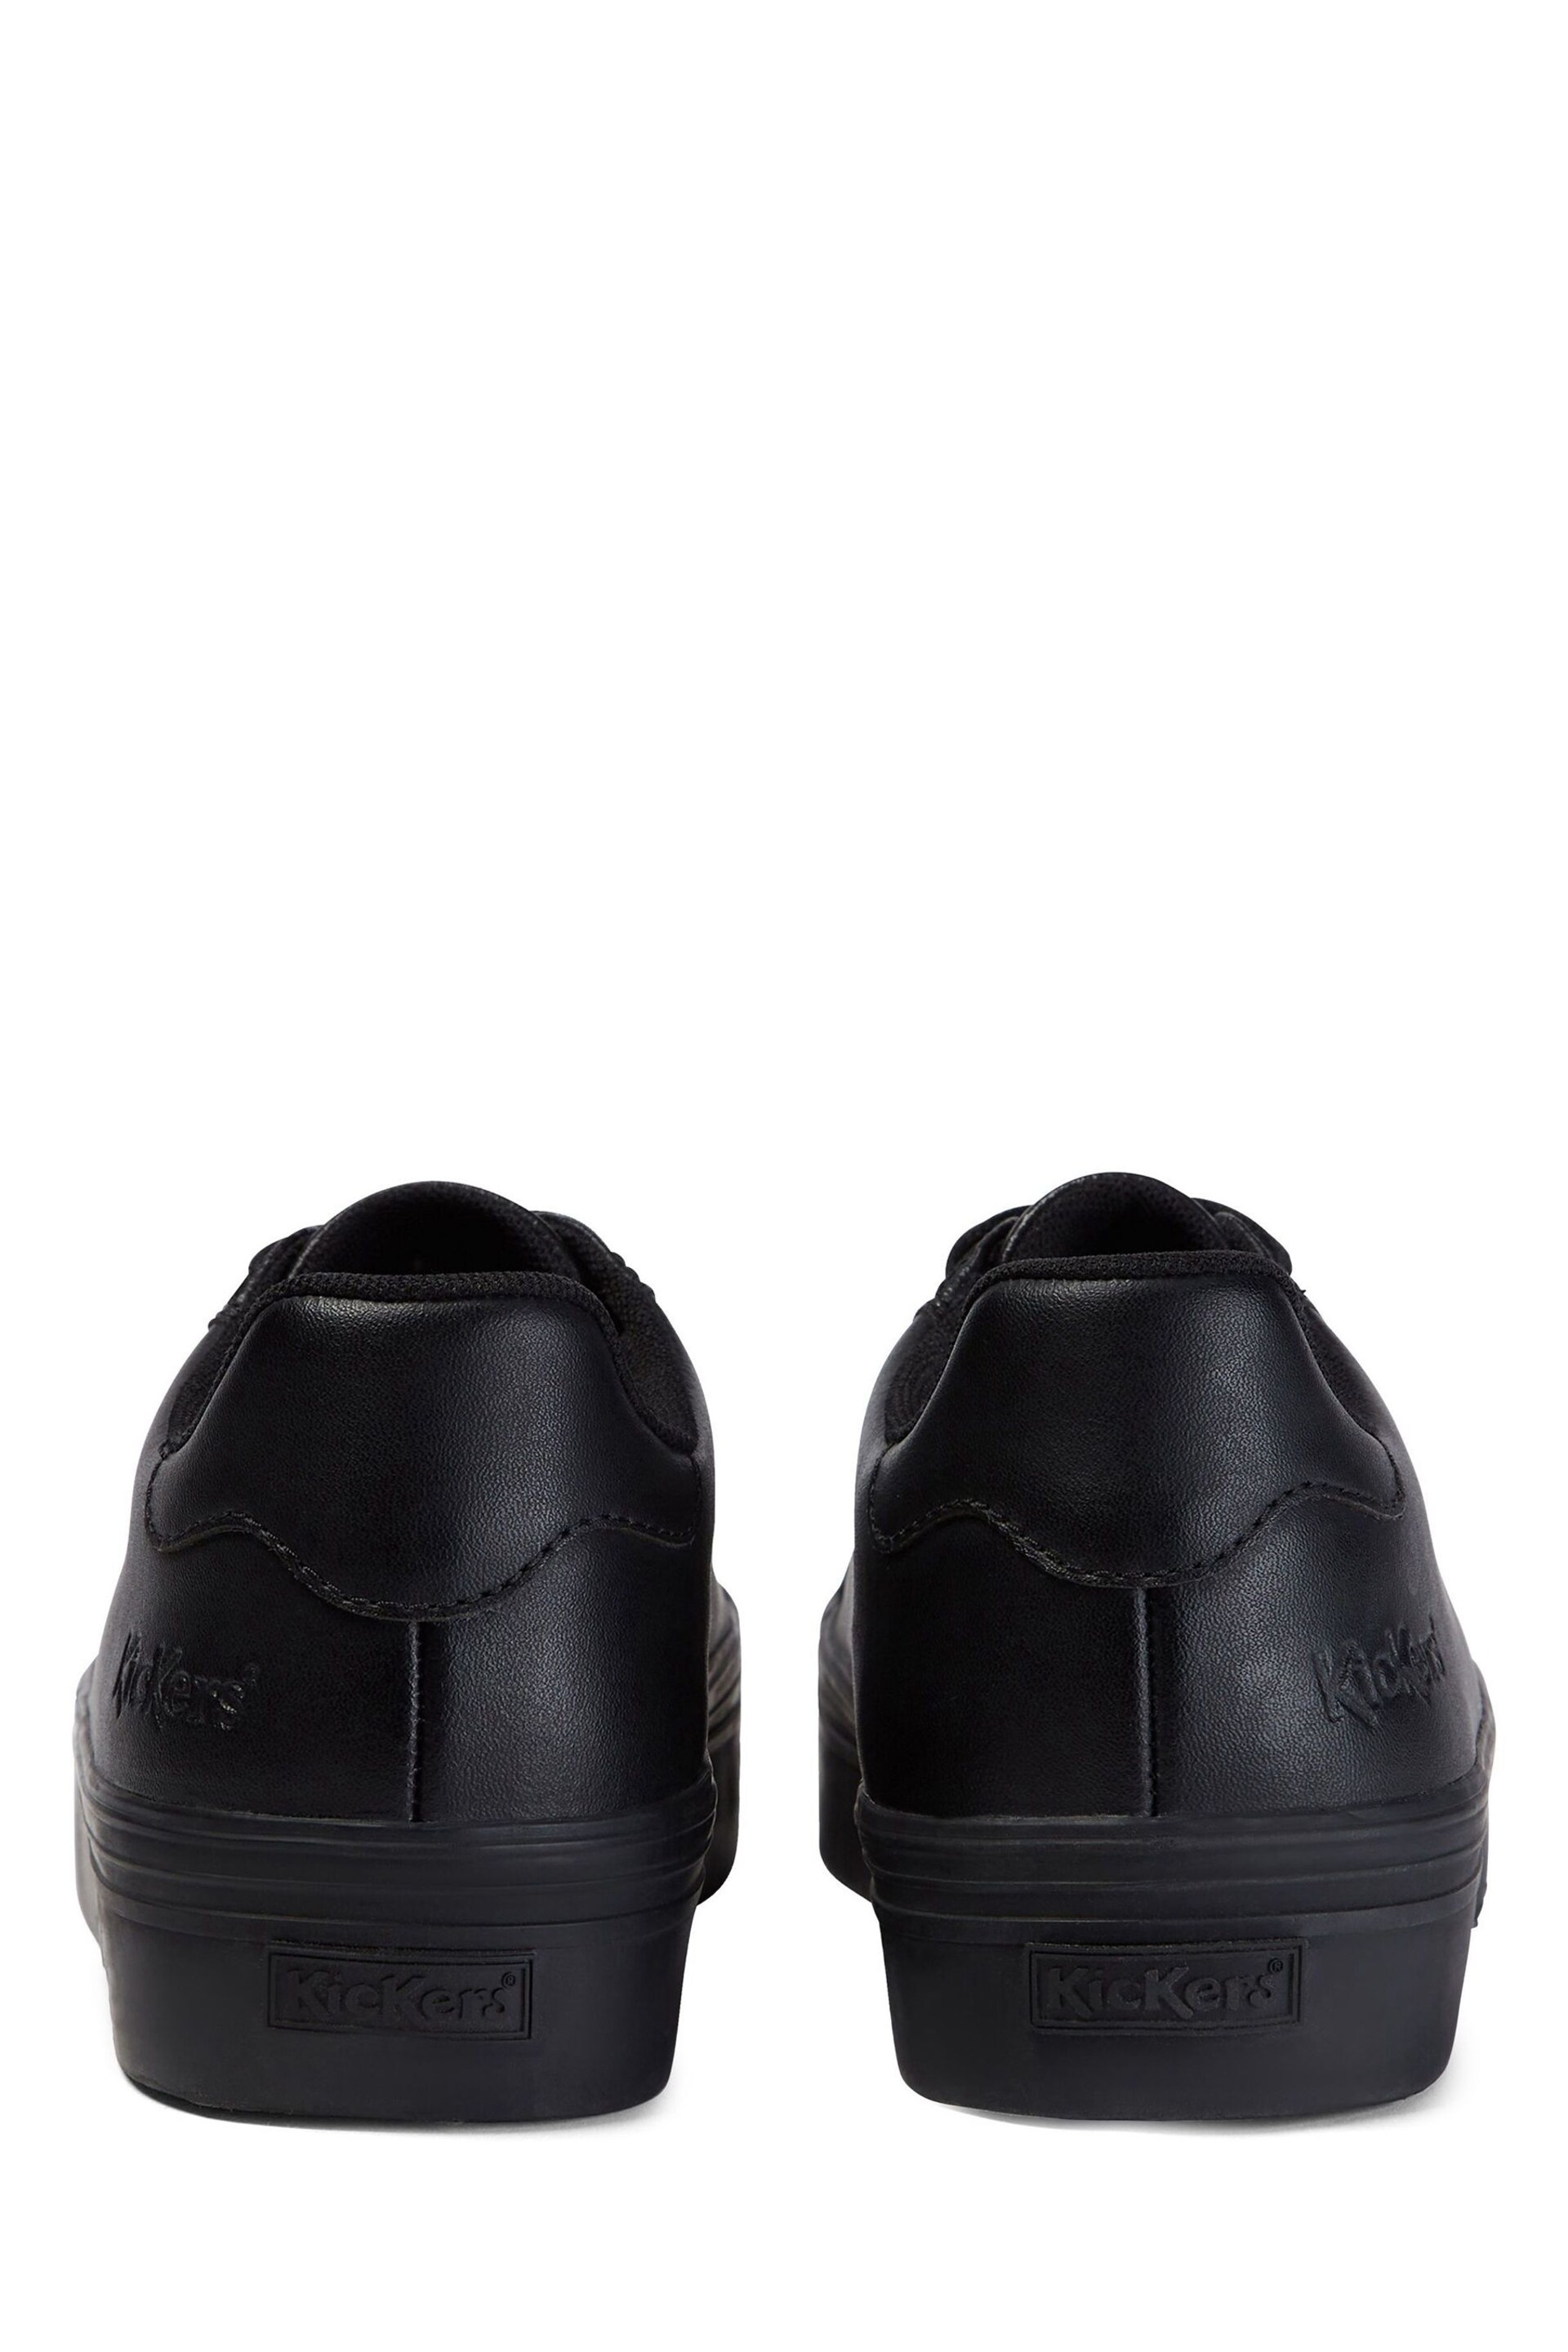 Kickers Womens Black Tovni Stack Leather Shoes - Image 6 of 17